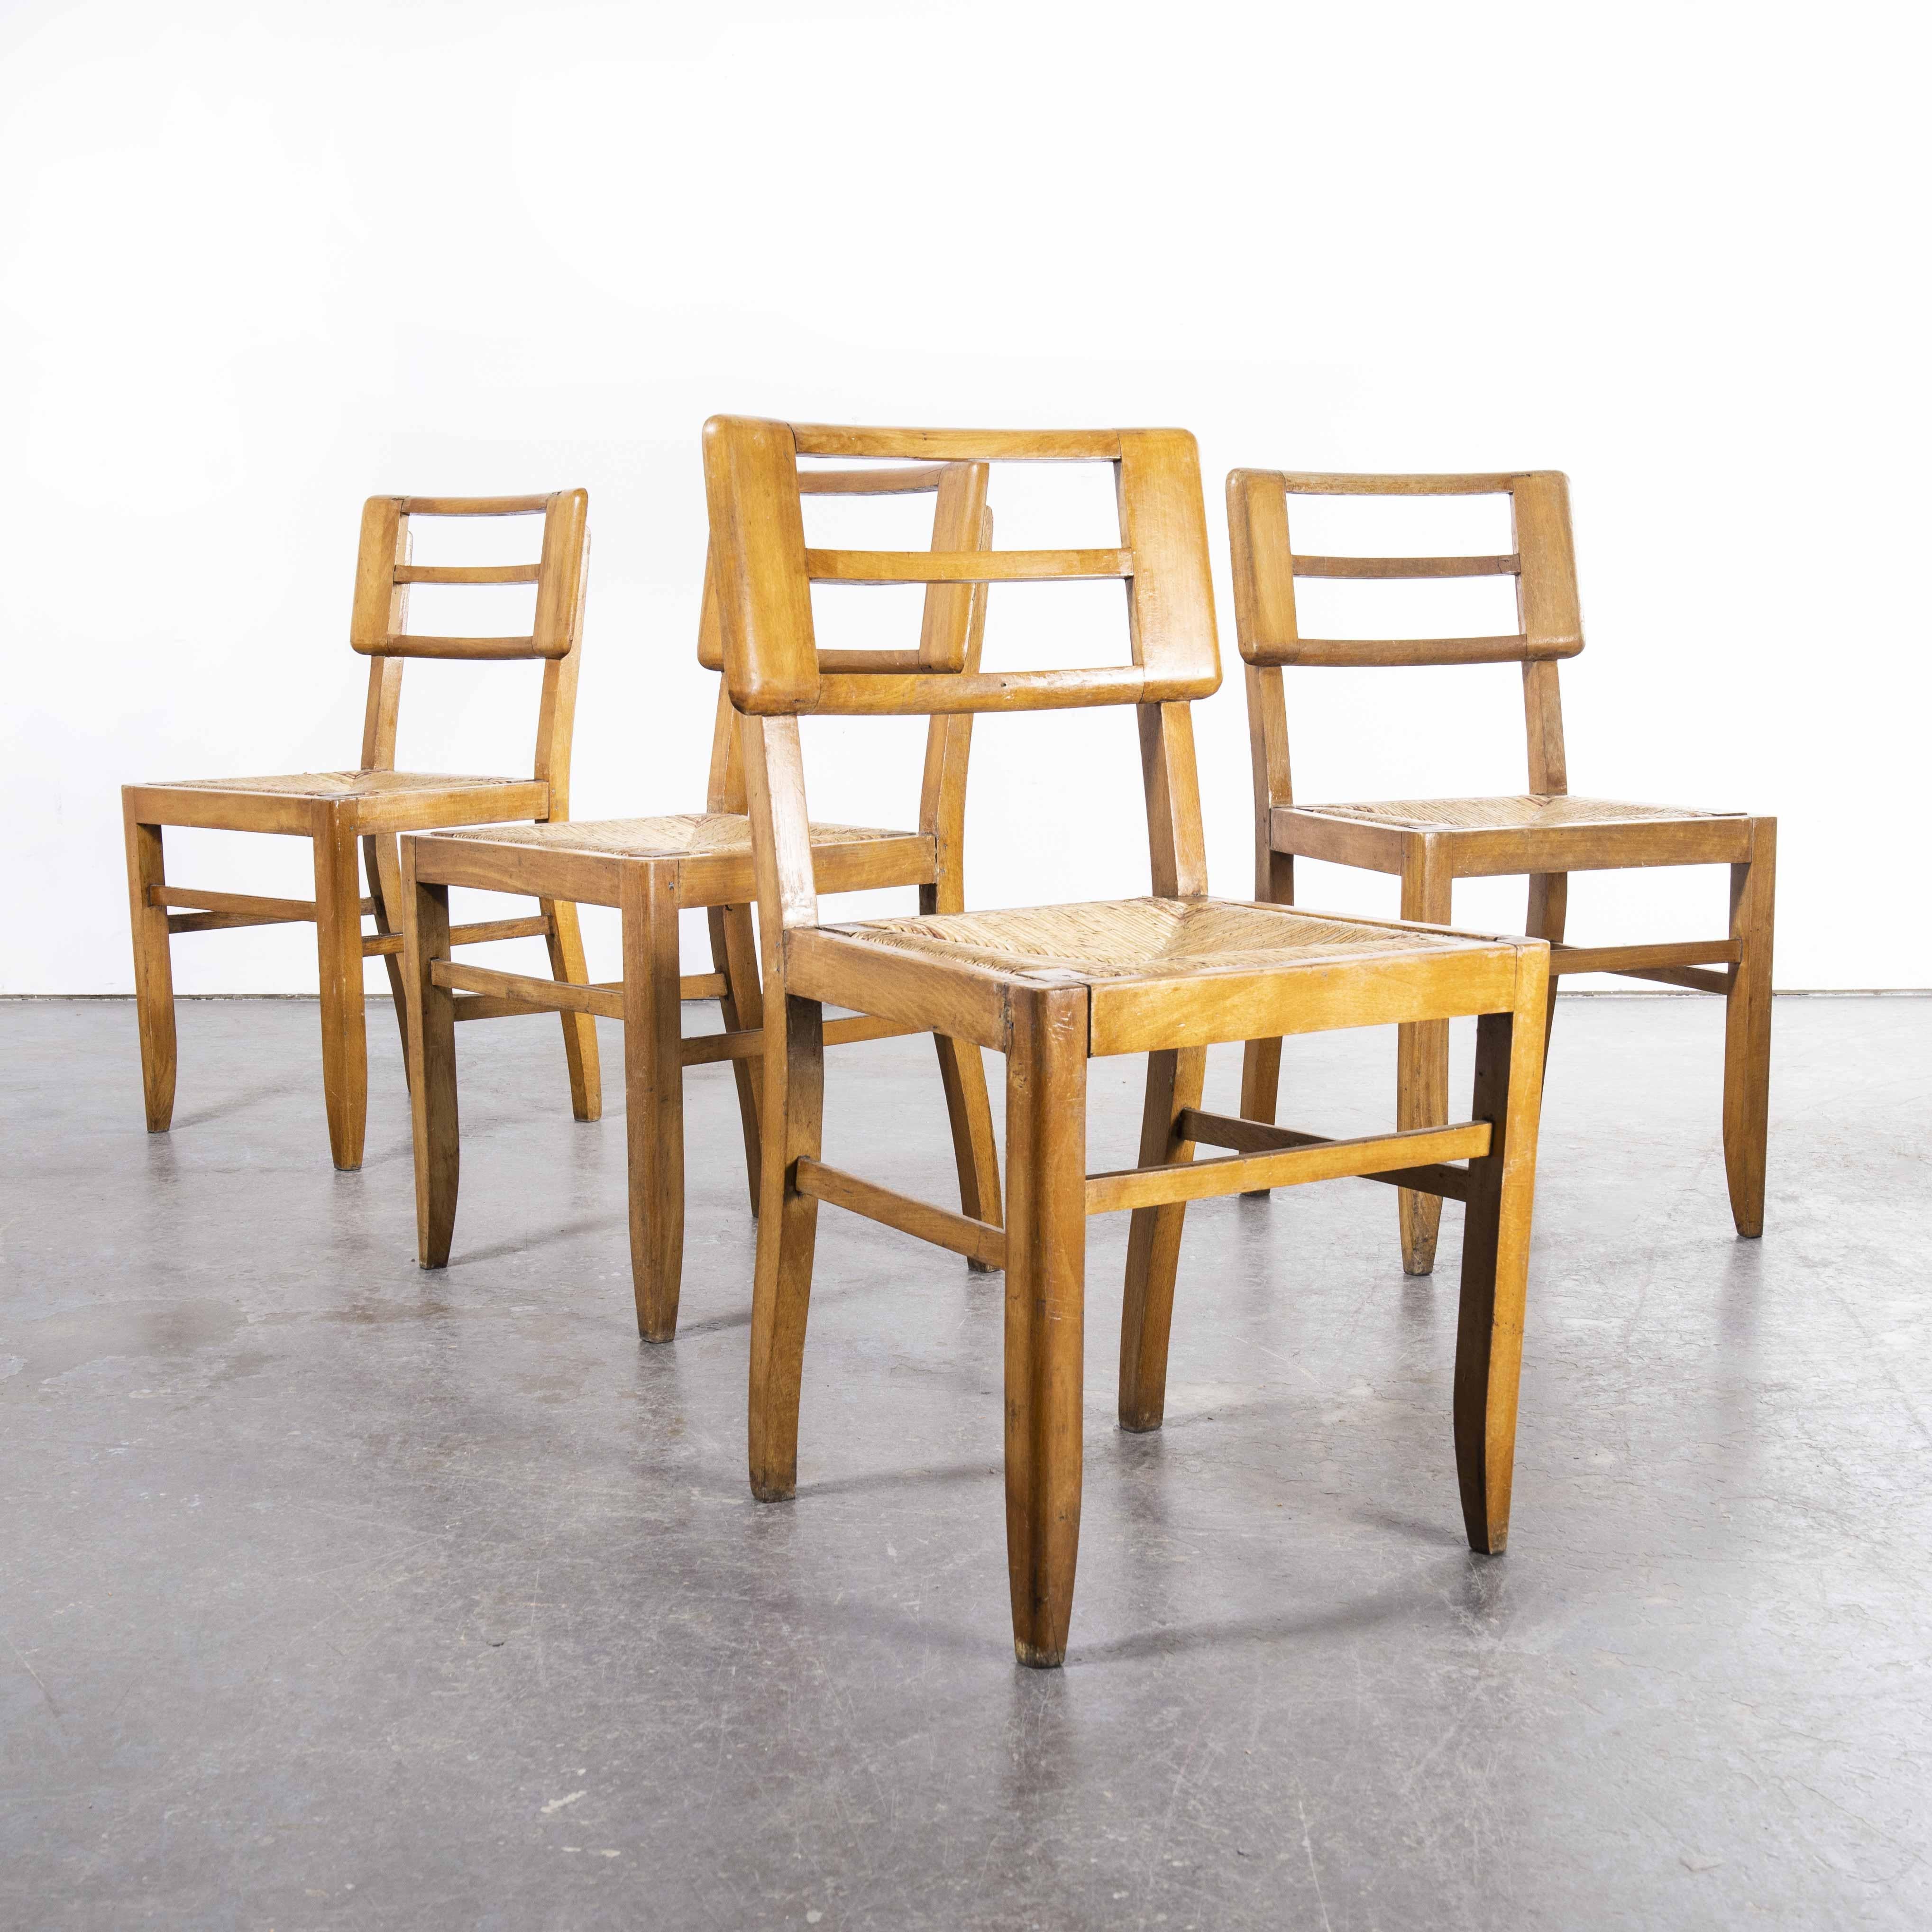 1950’s French rush seated dining chairs pierre crueges – set of four
1950’s French rush seated dining chairs pierre crueges – set of four. One of our favourite mid century chairs by the French designer Pierre Crueges. The frames are beech with the